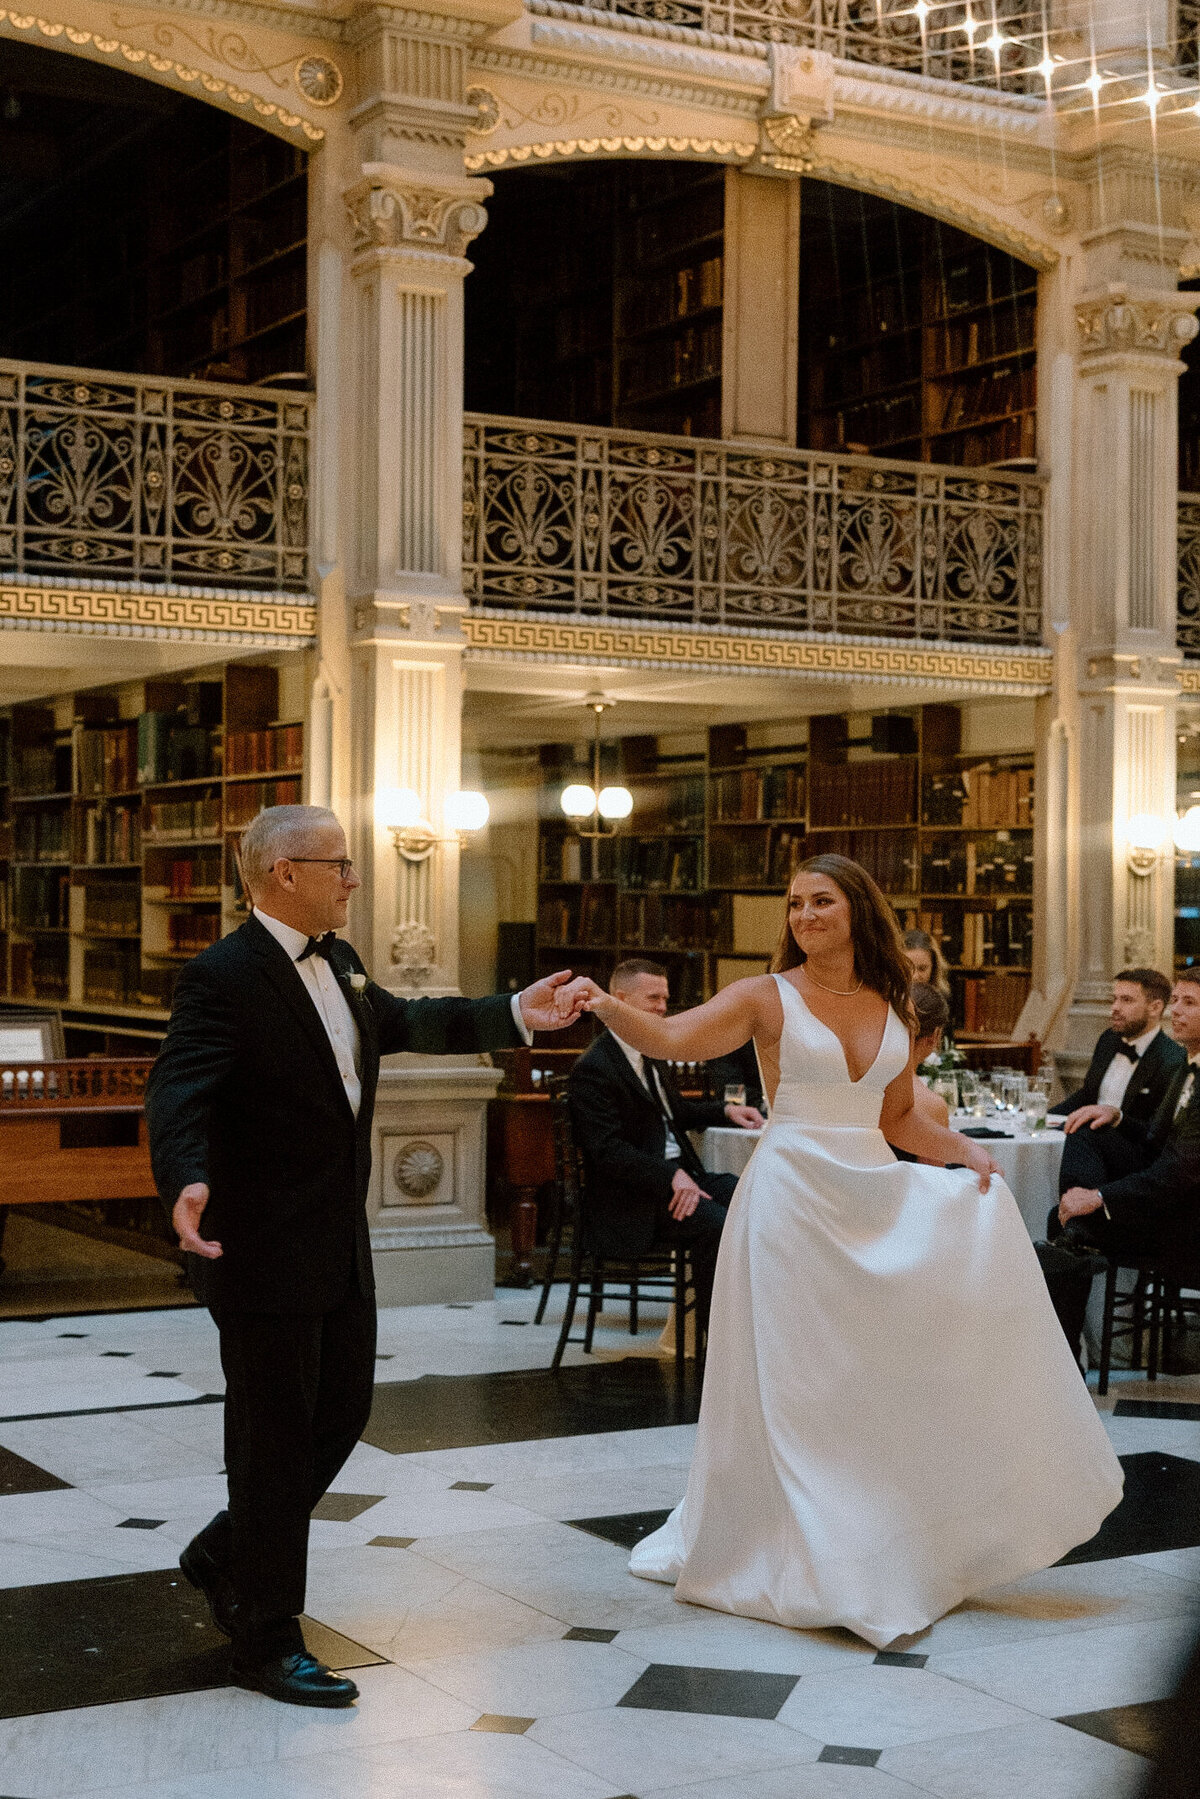 Event-Planning-DC-Wedding-Baltimore-Venue-George-Peabody-Library-Dad-Bride-Anna-Lowe-Photography